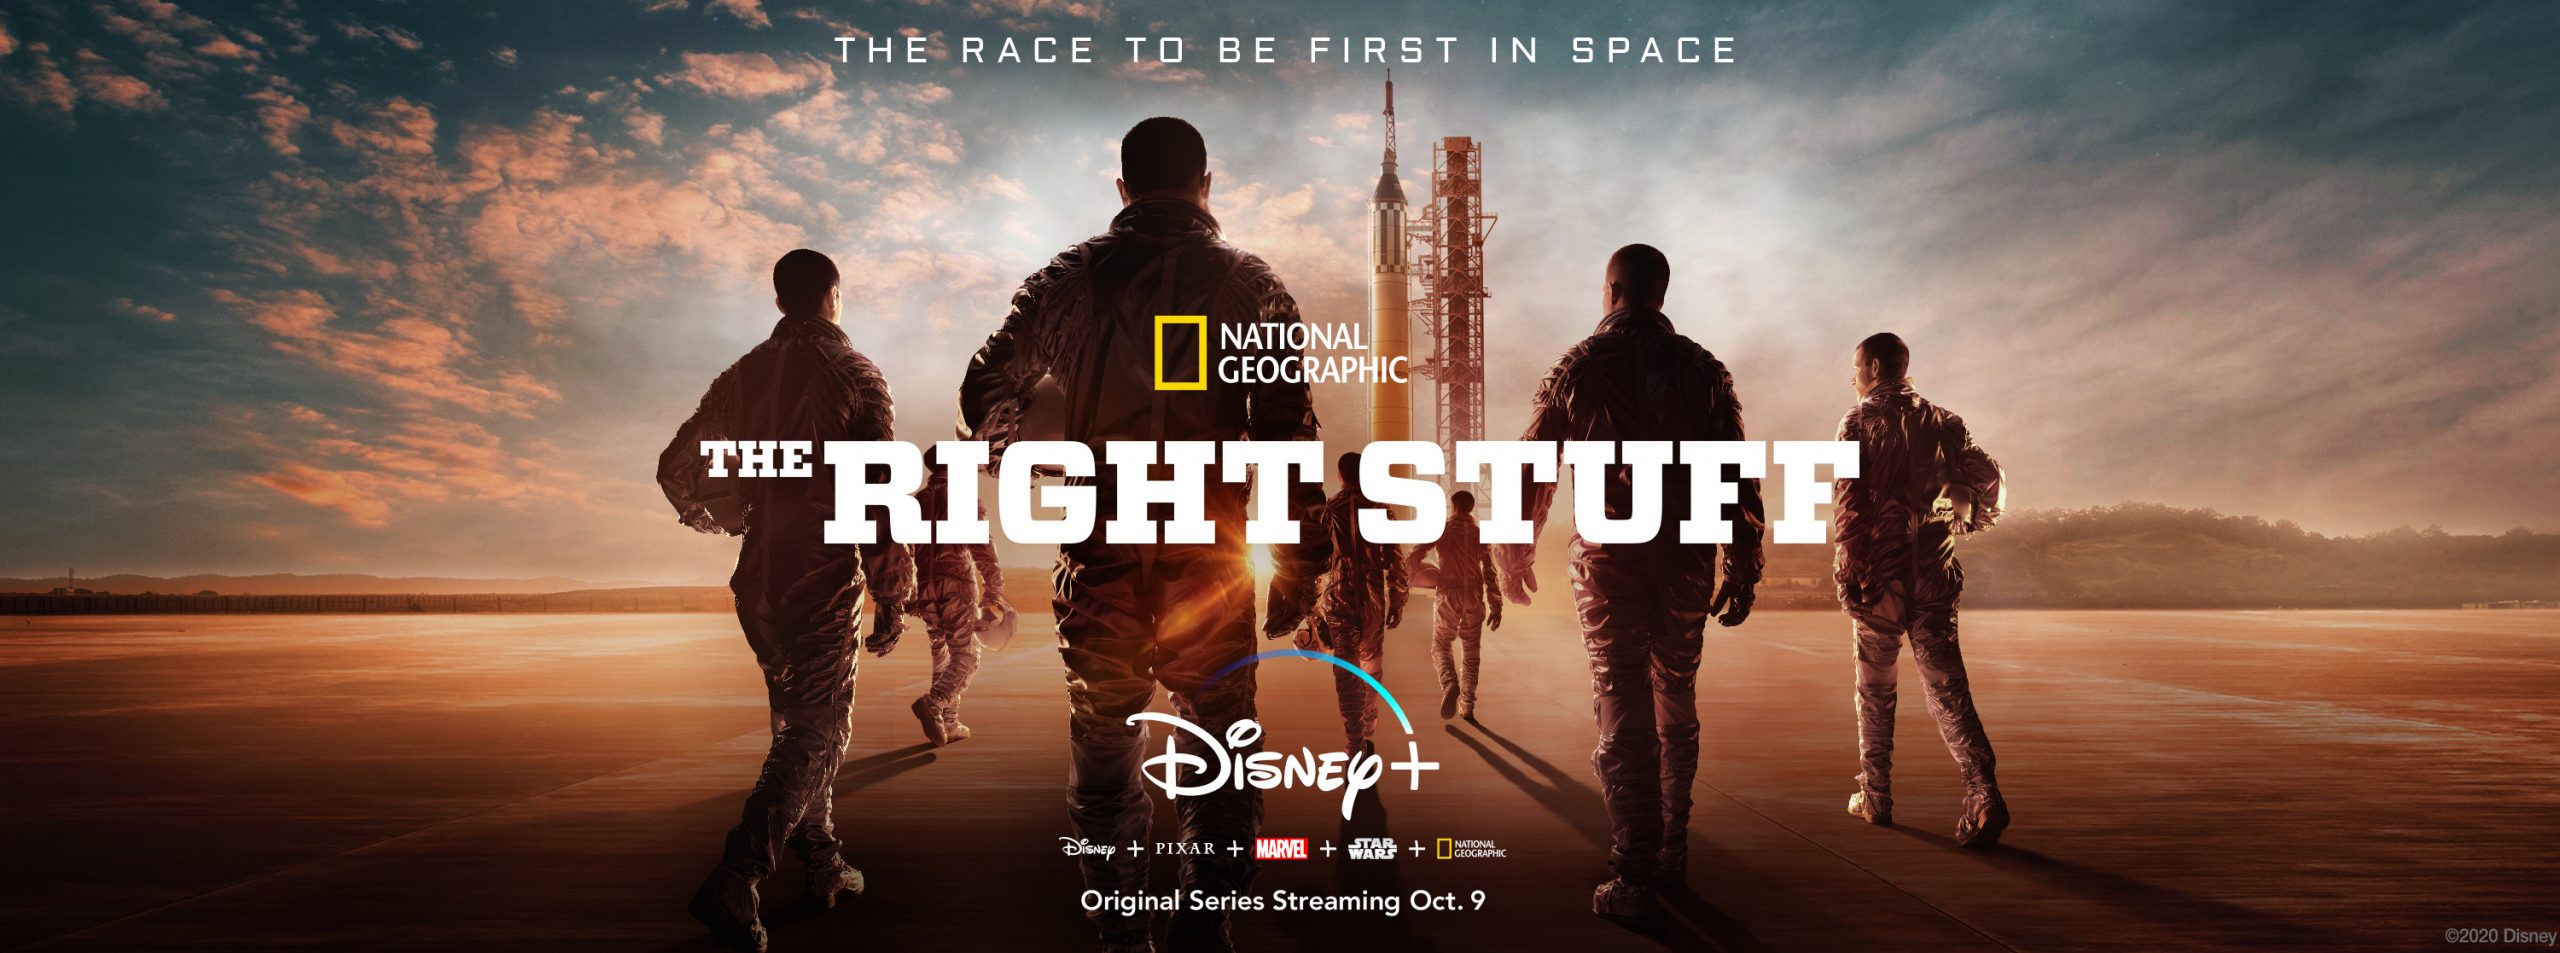 Disney+ ‘The Right Stuff’ Reminds Us What This Country Is Capable Of